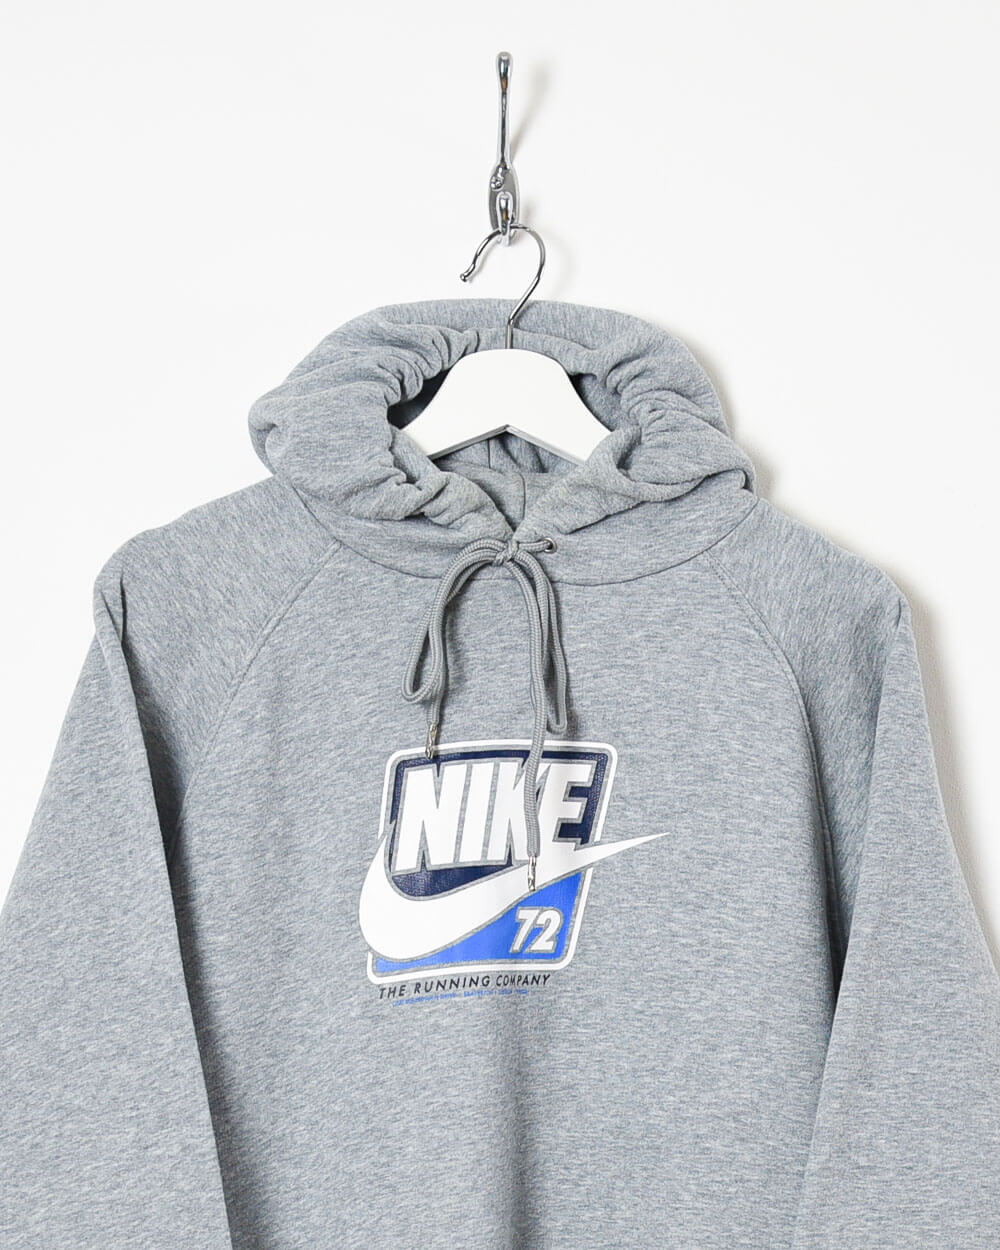 Nike 72 The Running Company Hoodie - Medium - Domno Vintage 90s, 80s, 00s Retro and Vintage Clothing 